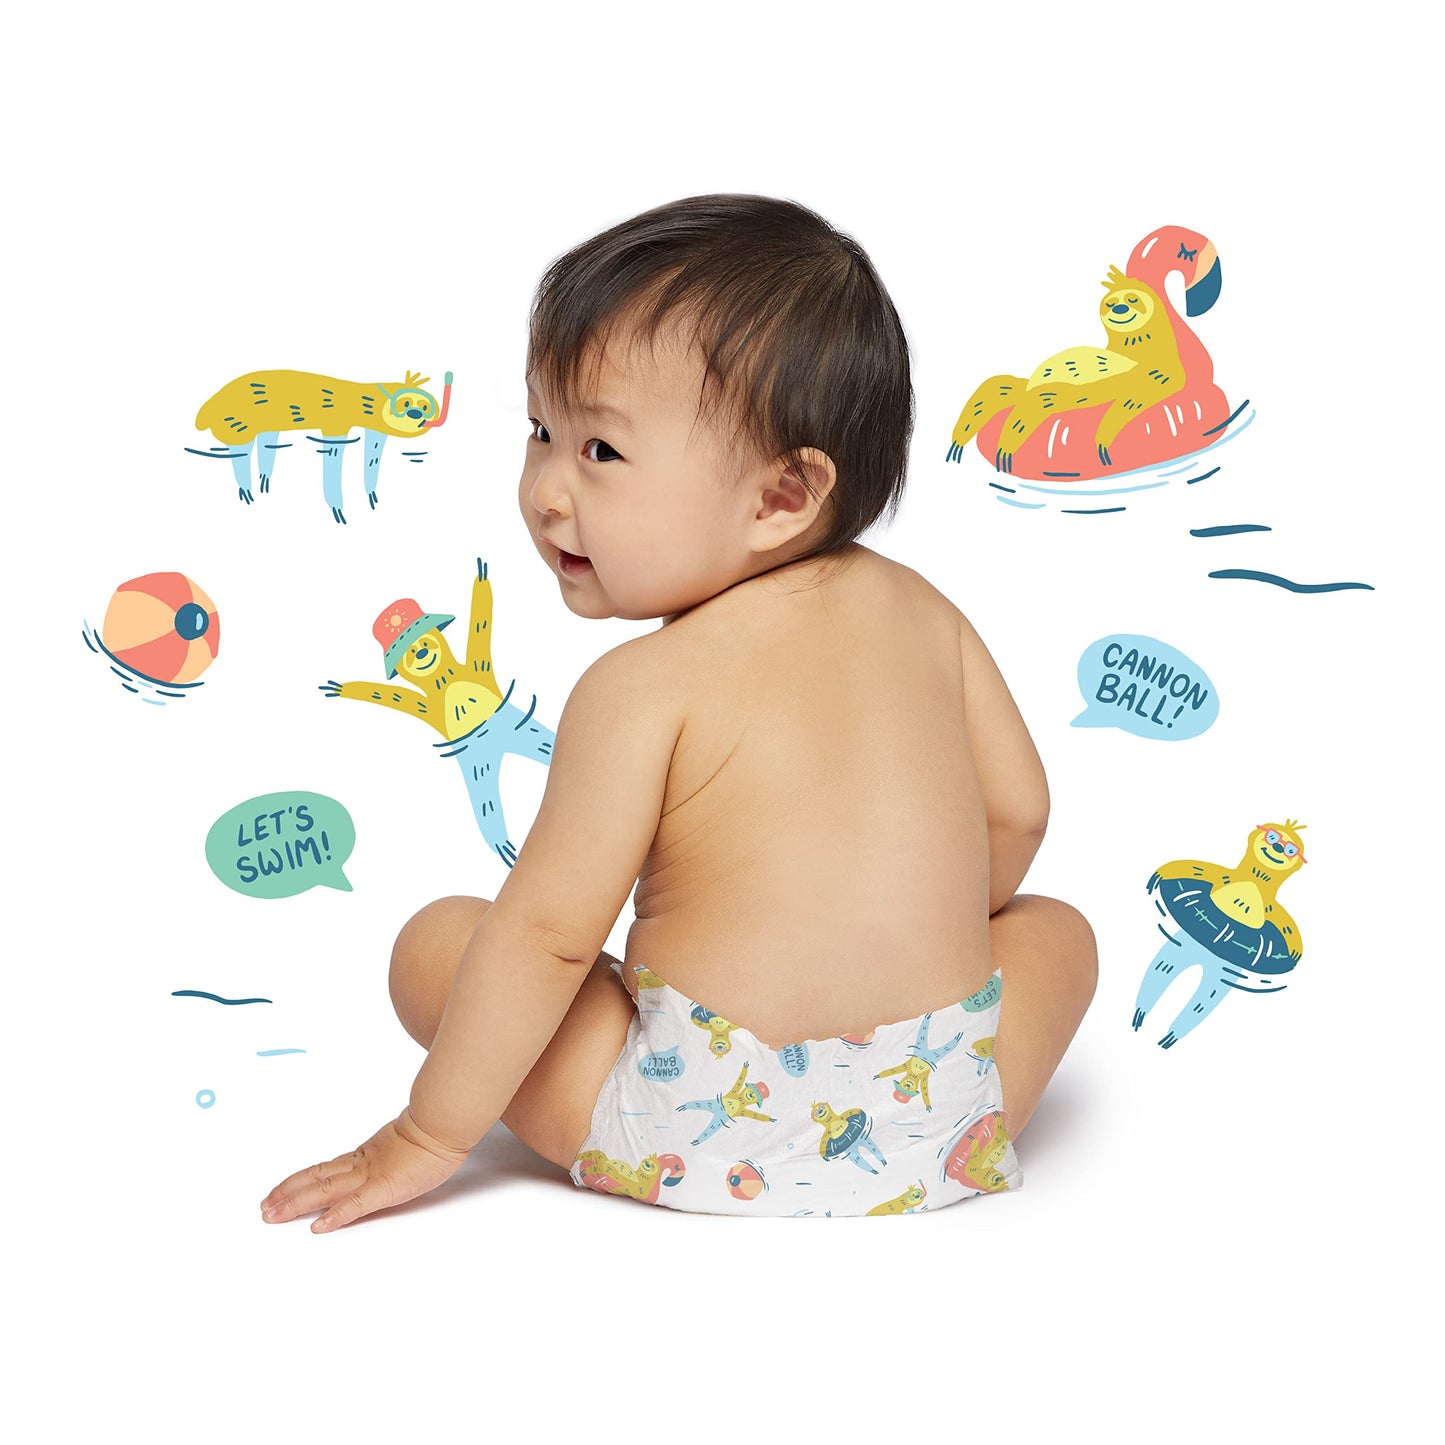 Hello Bello Premium Swim Diapers - Size S (16-28 lbs), Cute Extra-Bright Lobster Designs, 20 Count Jumbo Pack